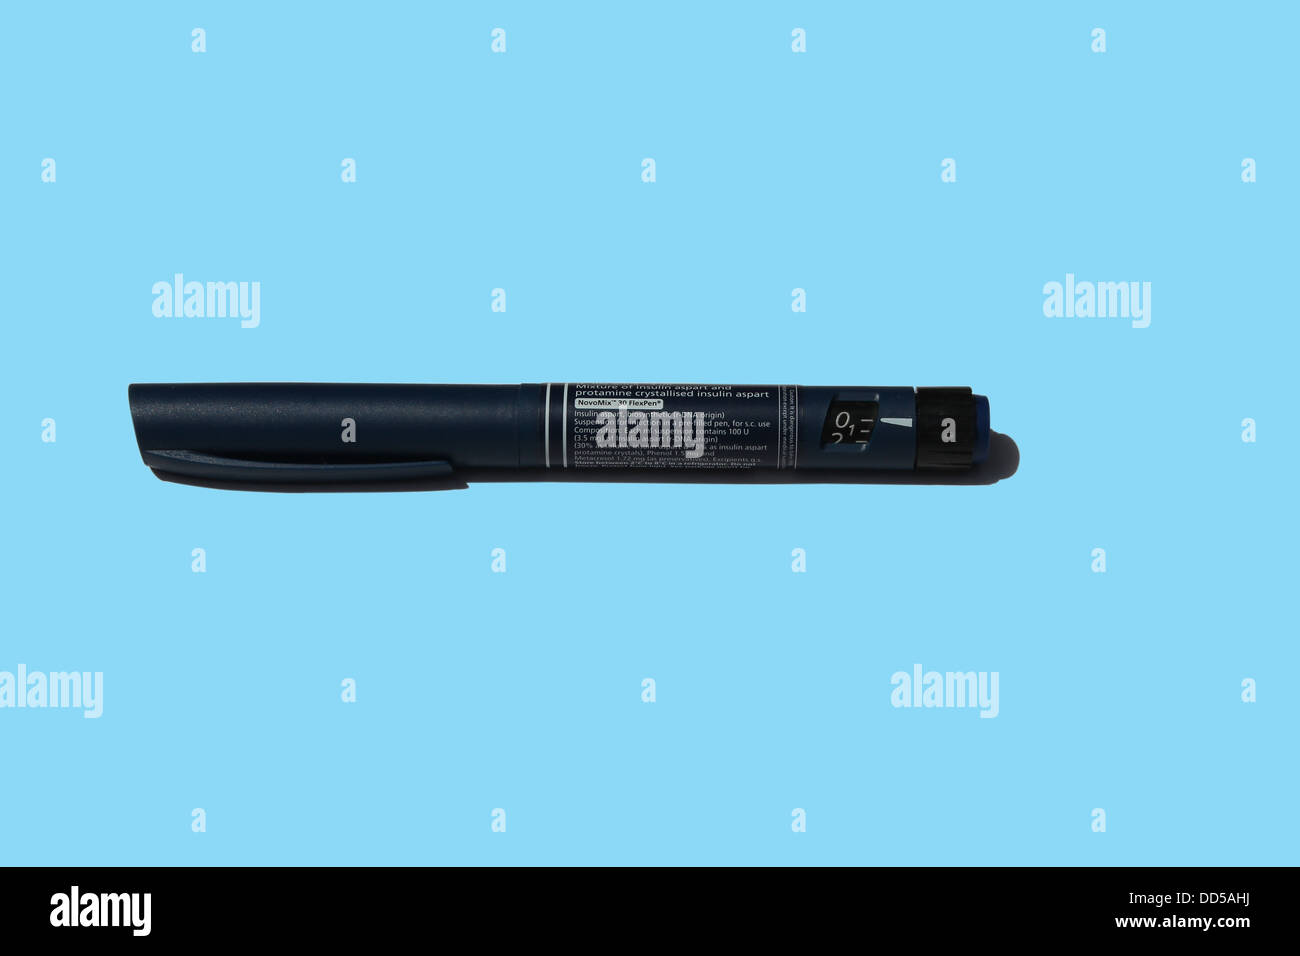 An insulin pen for injecting insulin to diabetic patients Stock Photo